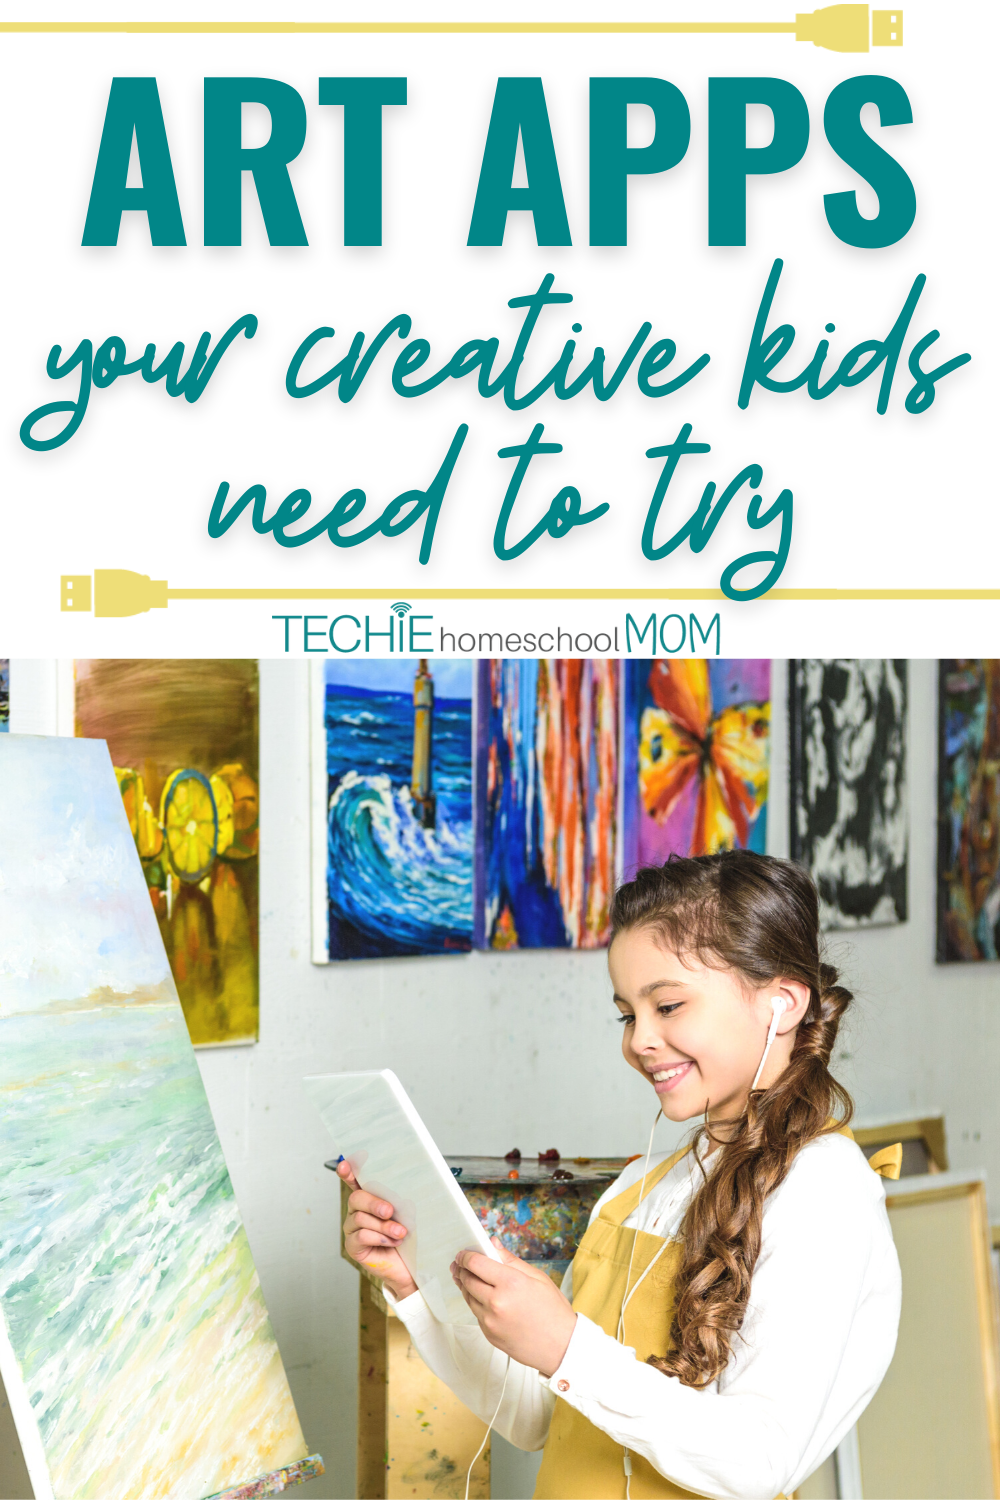 My kids love art and they love playing on my phone. So, I found this bunch of apps that will satisfy both of those loves. Check it out to try 12 cool art education apps.